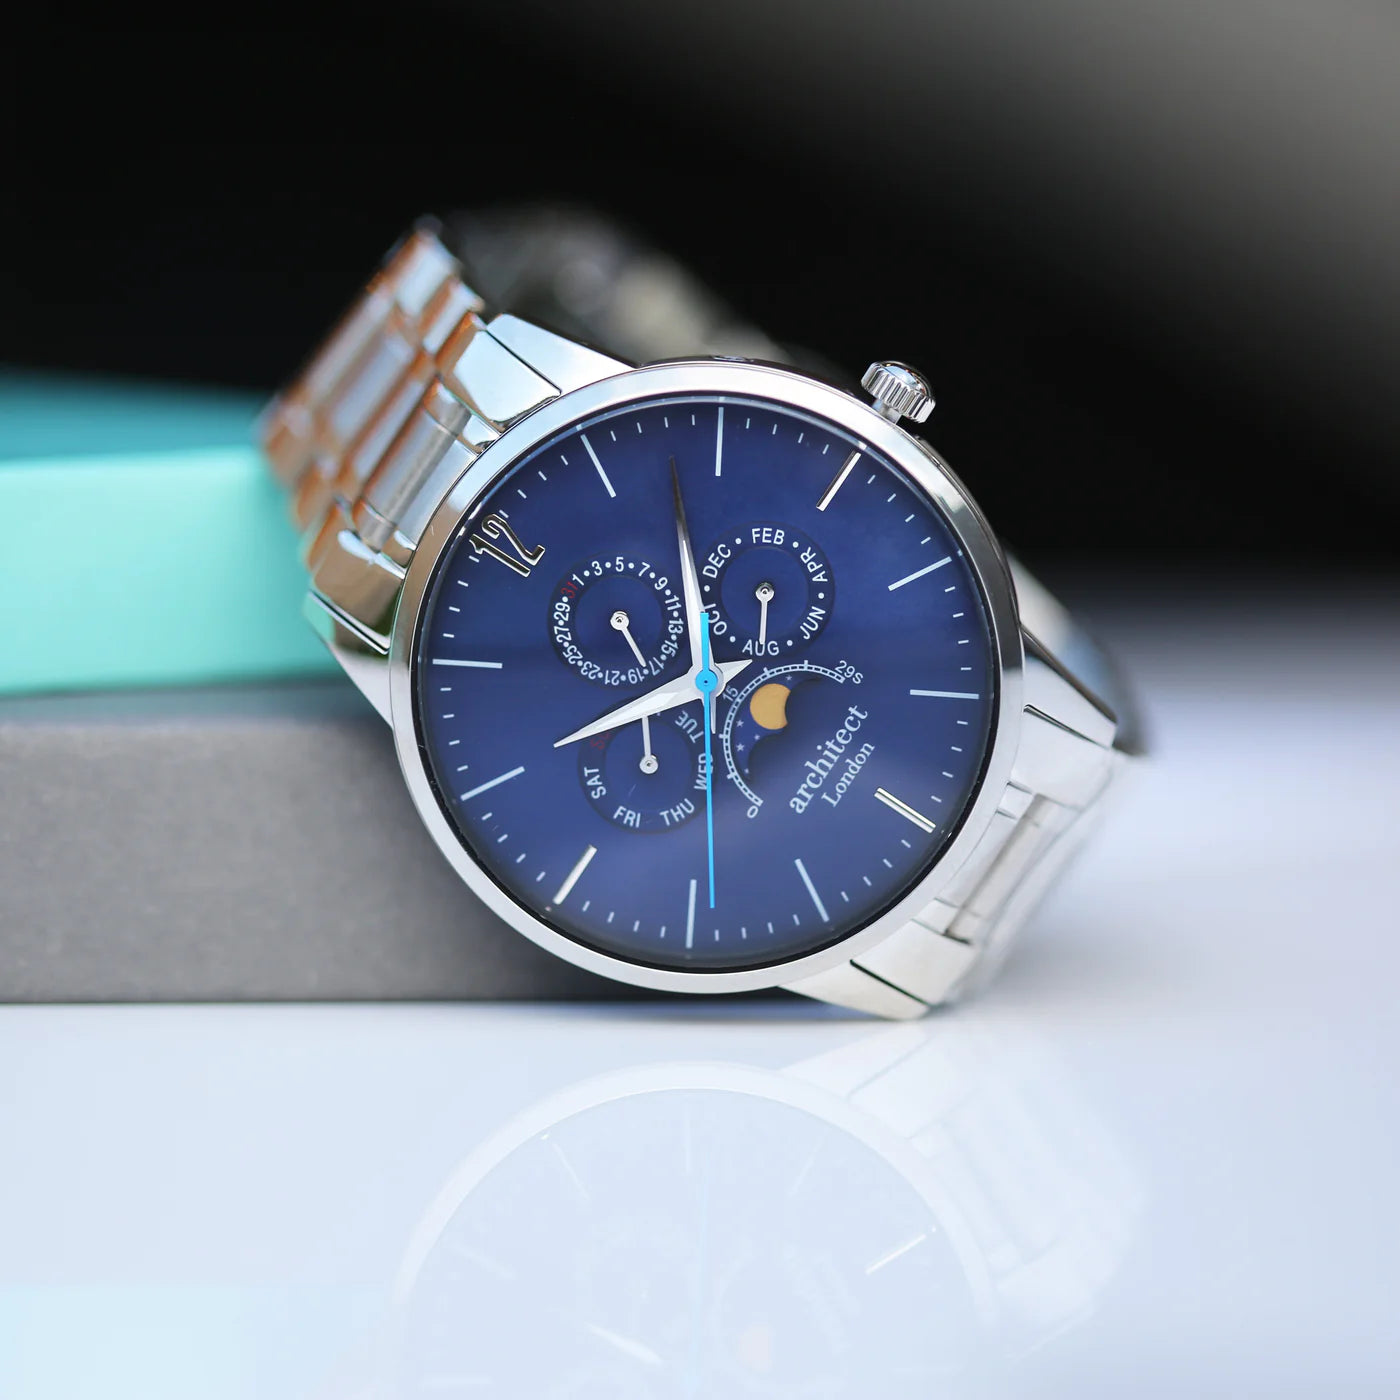 Image of a men's Architect Apollo Moonphase watch with a stainless steel strap and a blue face. The rear of the watch can be engraved with your own handwritten message or drawing.